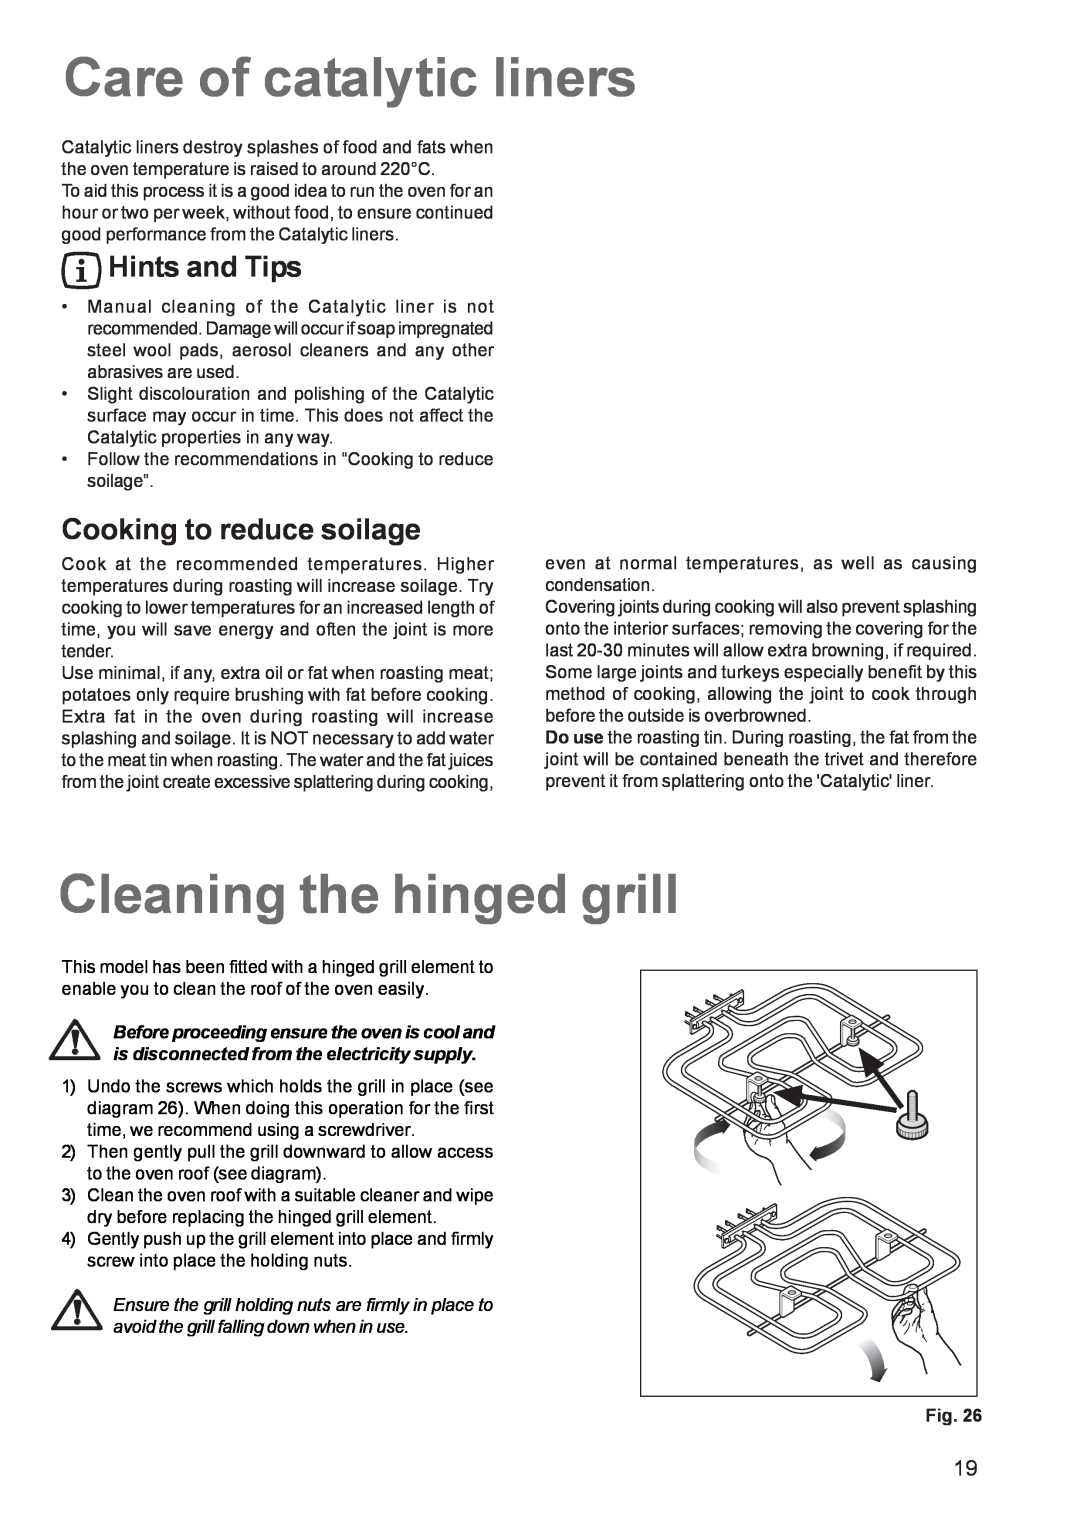 Zanussi ZBS 963 manual Care of catalytic liners, Cleaning the hinged grill, Cooking to reduce soilage, Hints and Tips 